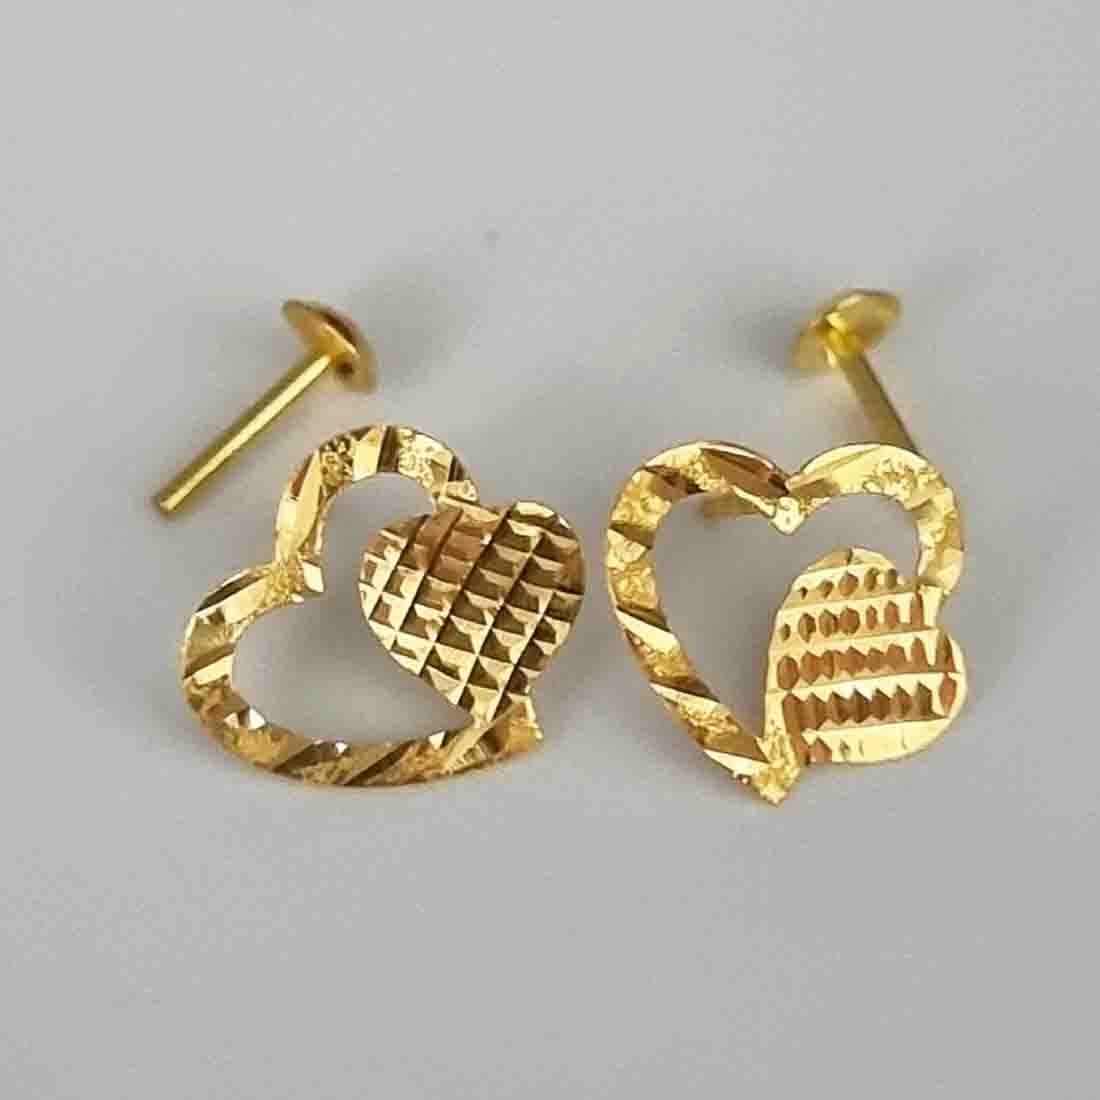 Discover more than 234 pure gold earrings design